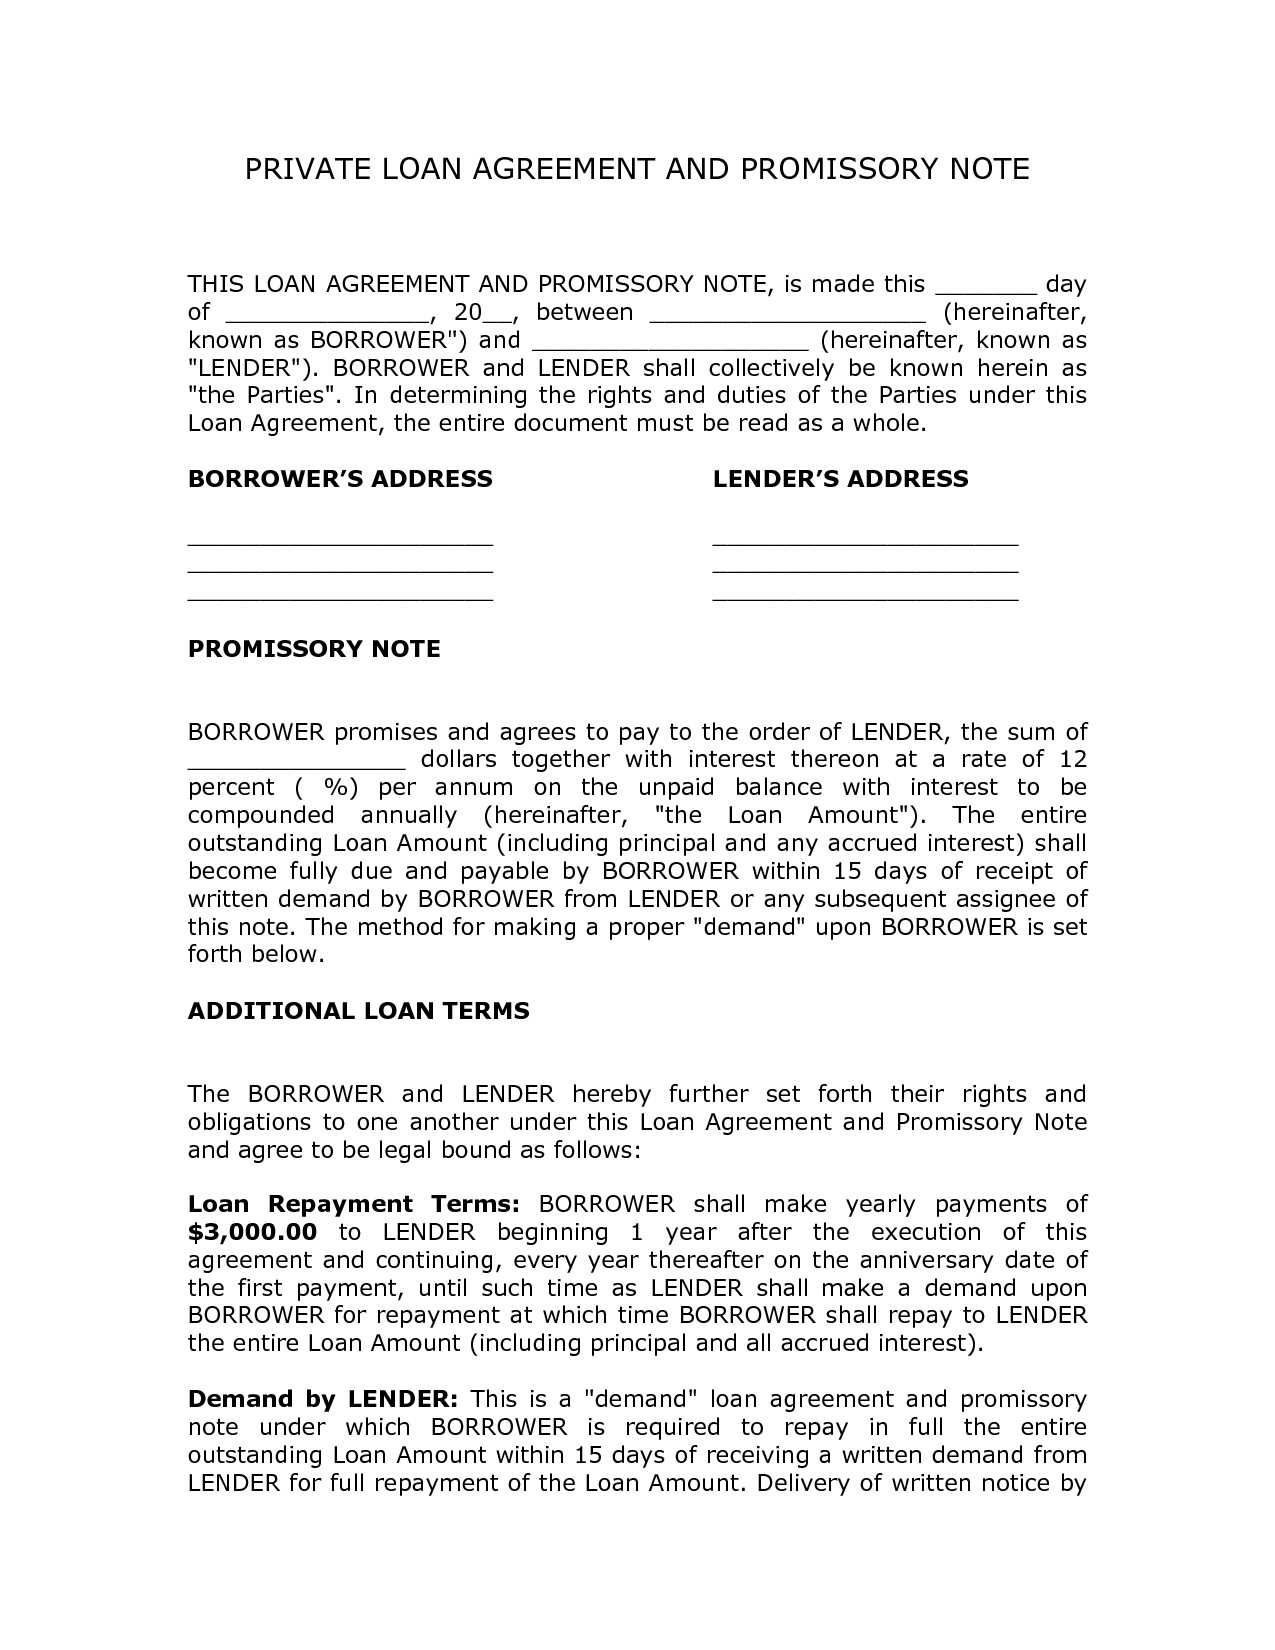 Corporate Loan Contract Sample Private Agreement Template Document